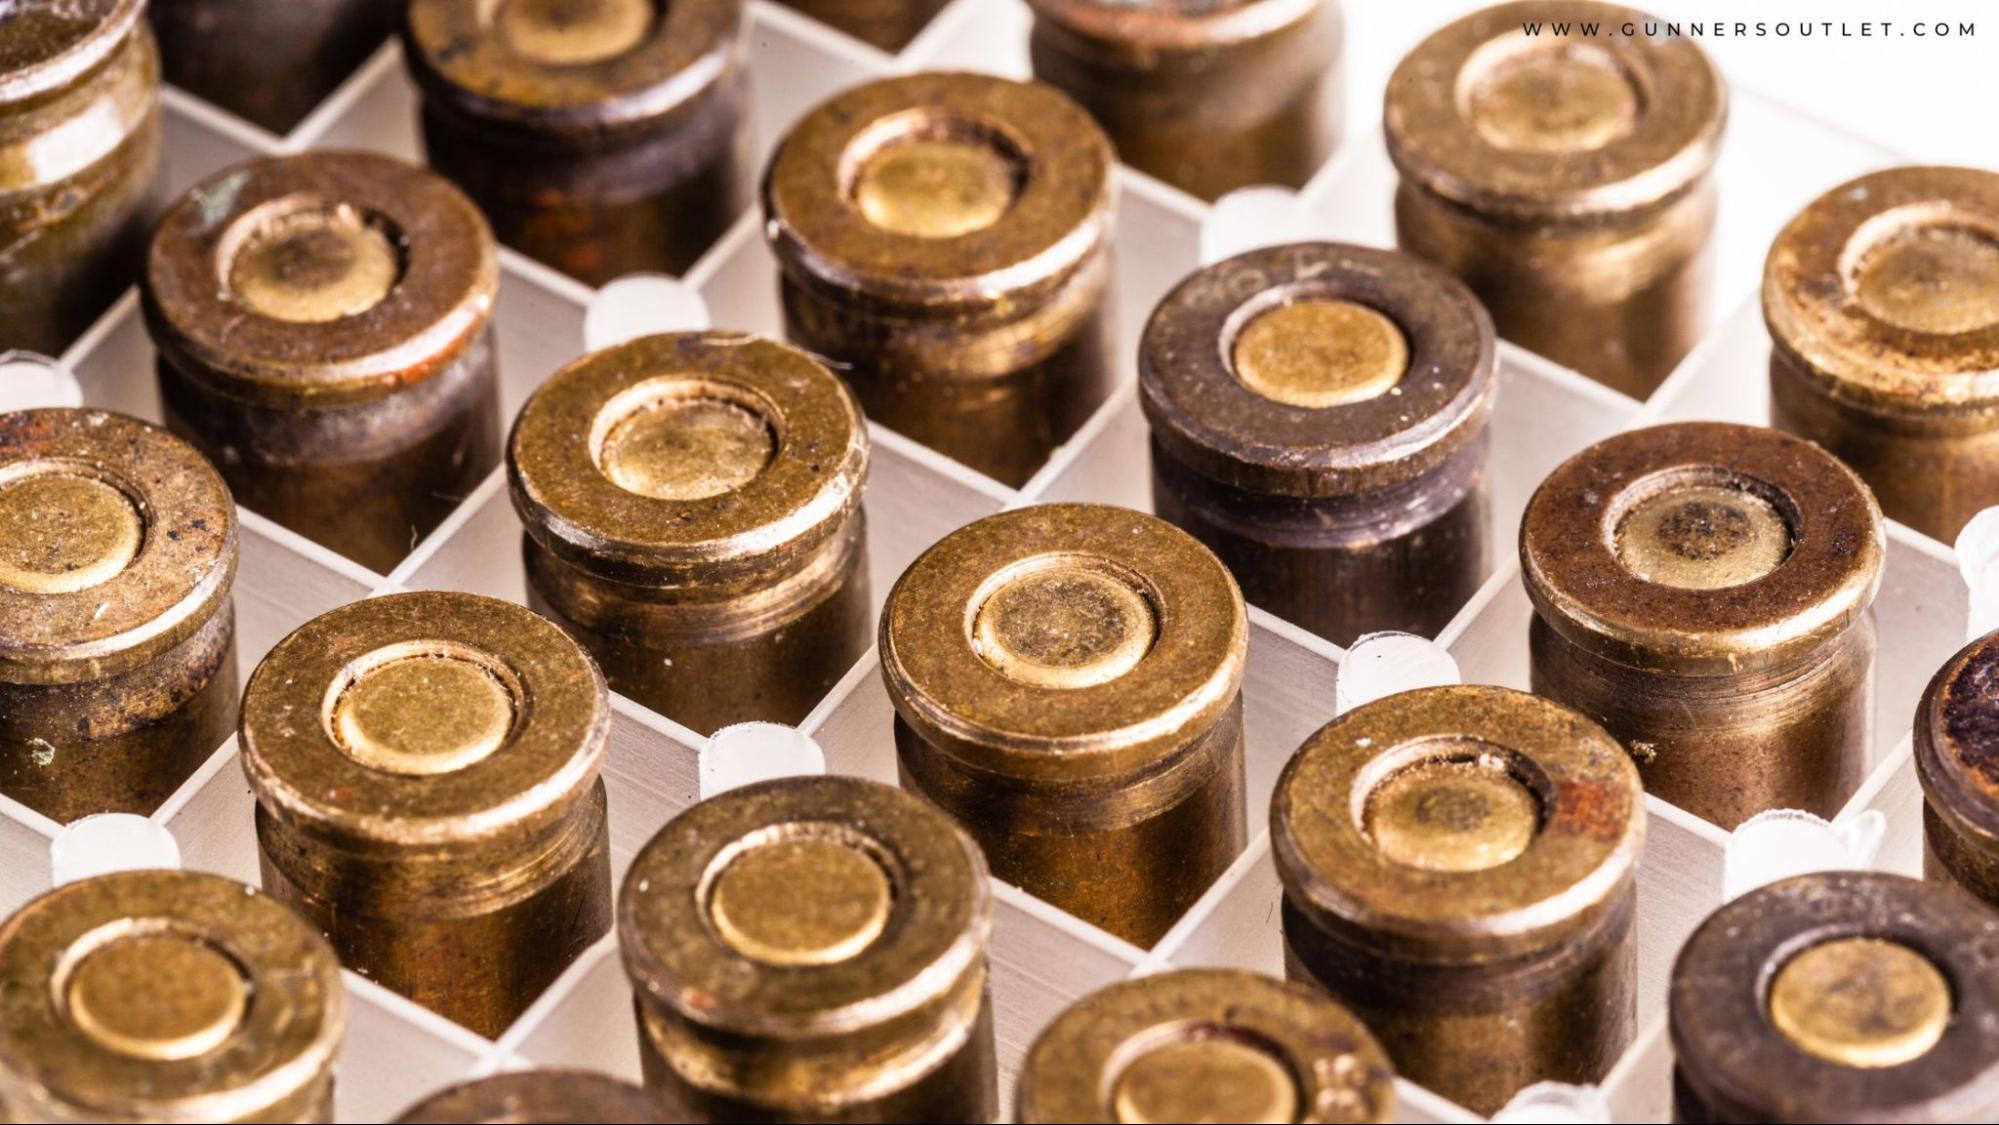 Old Ammunition: How to Know if Your Ammo is Still Good to Go